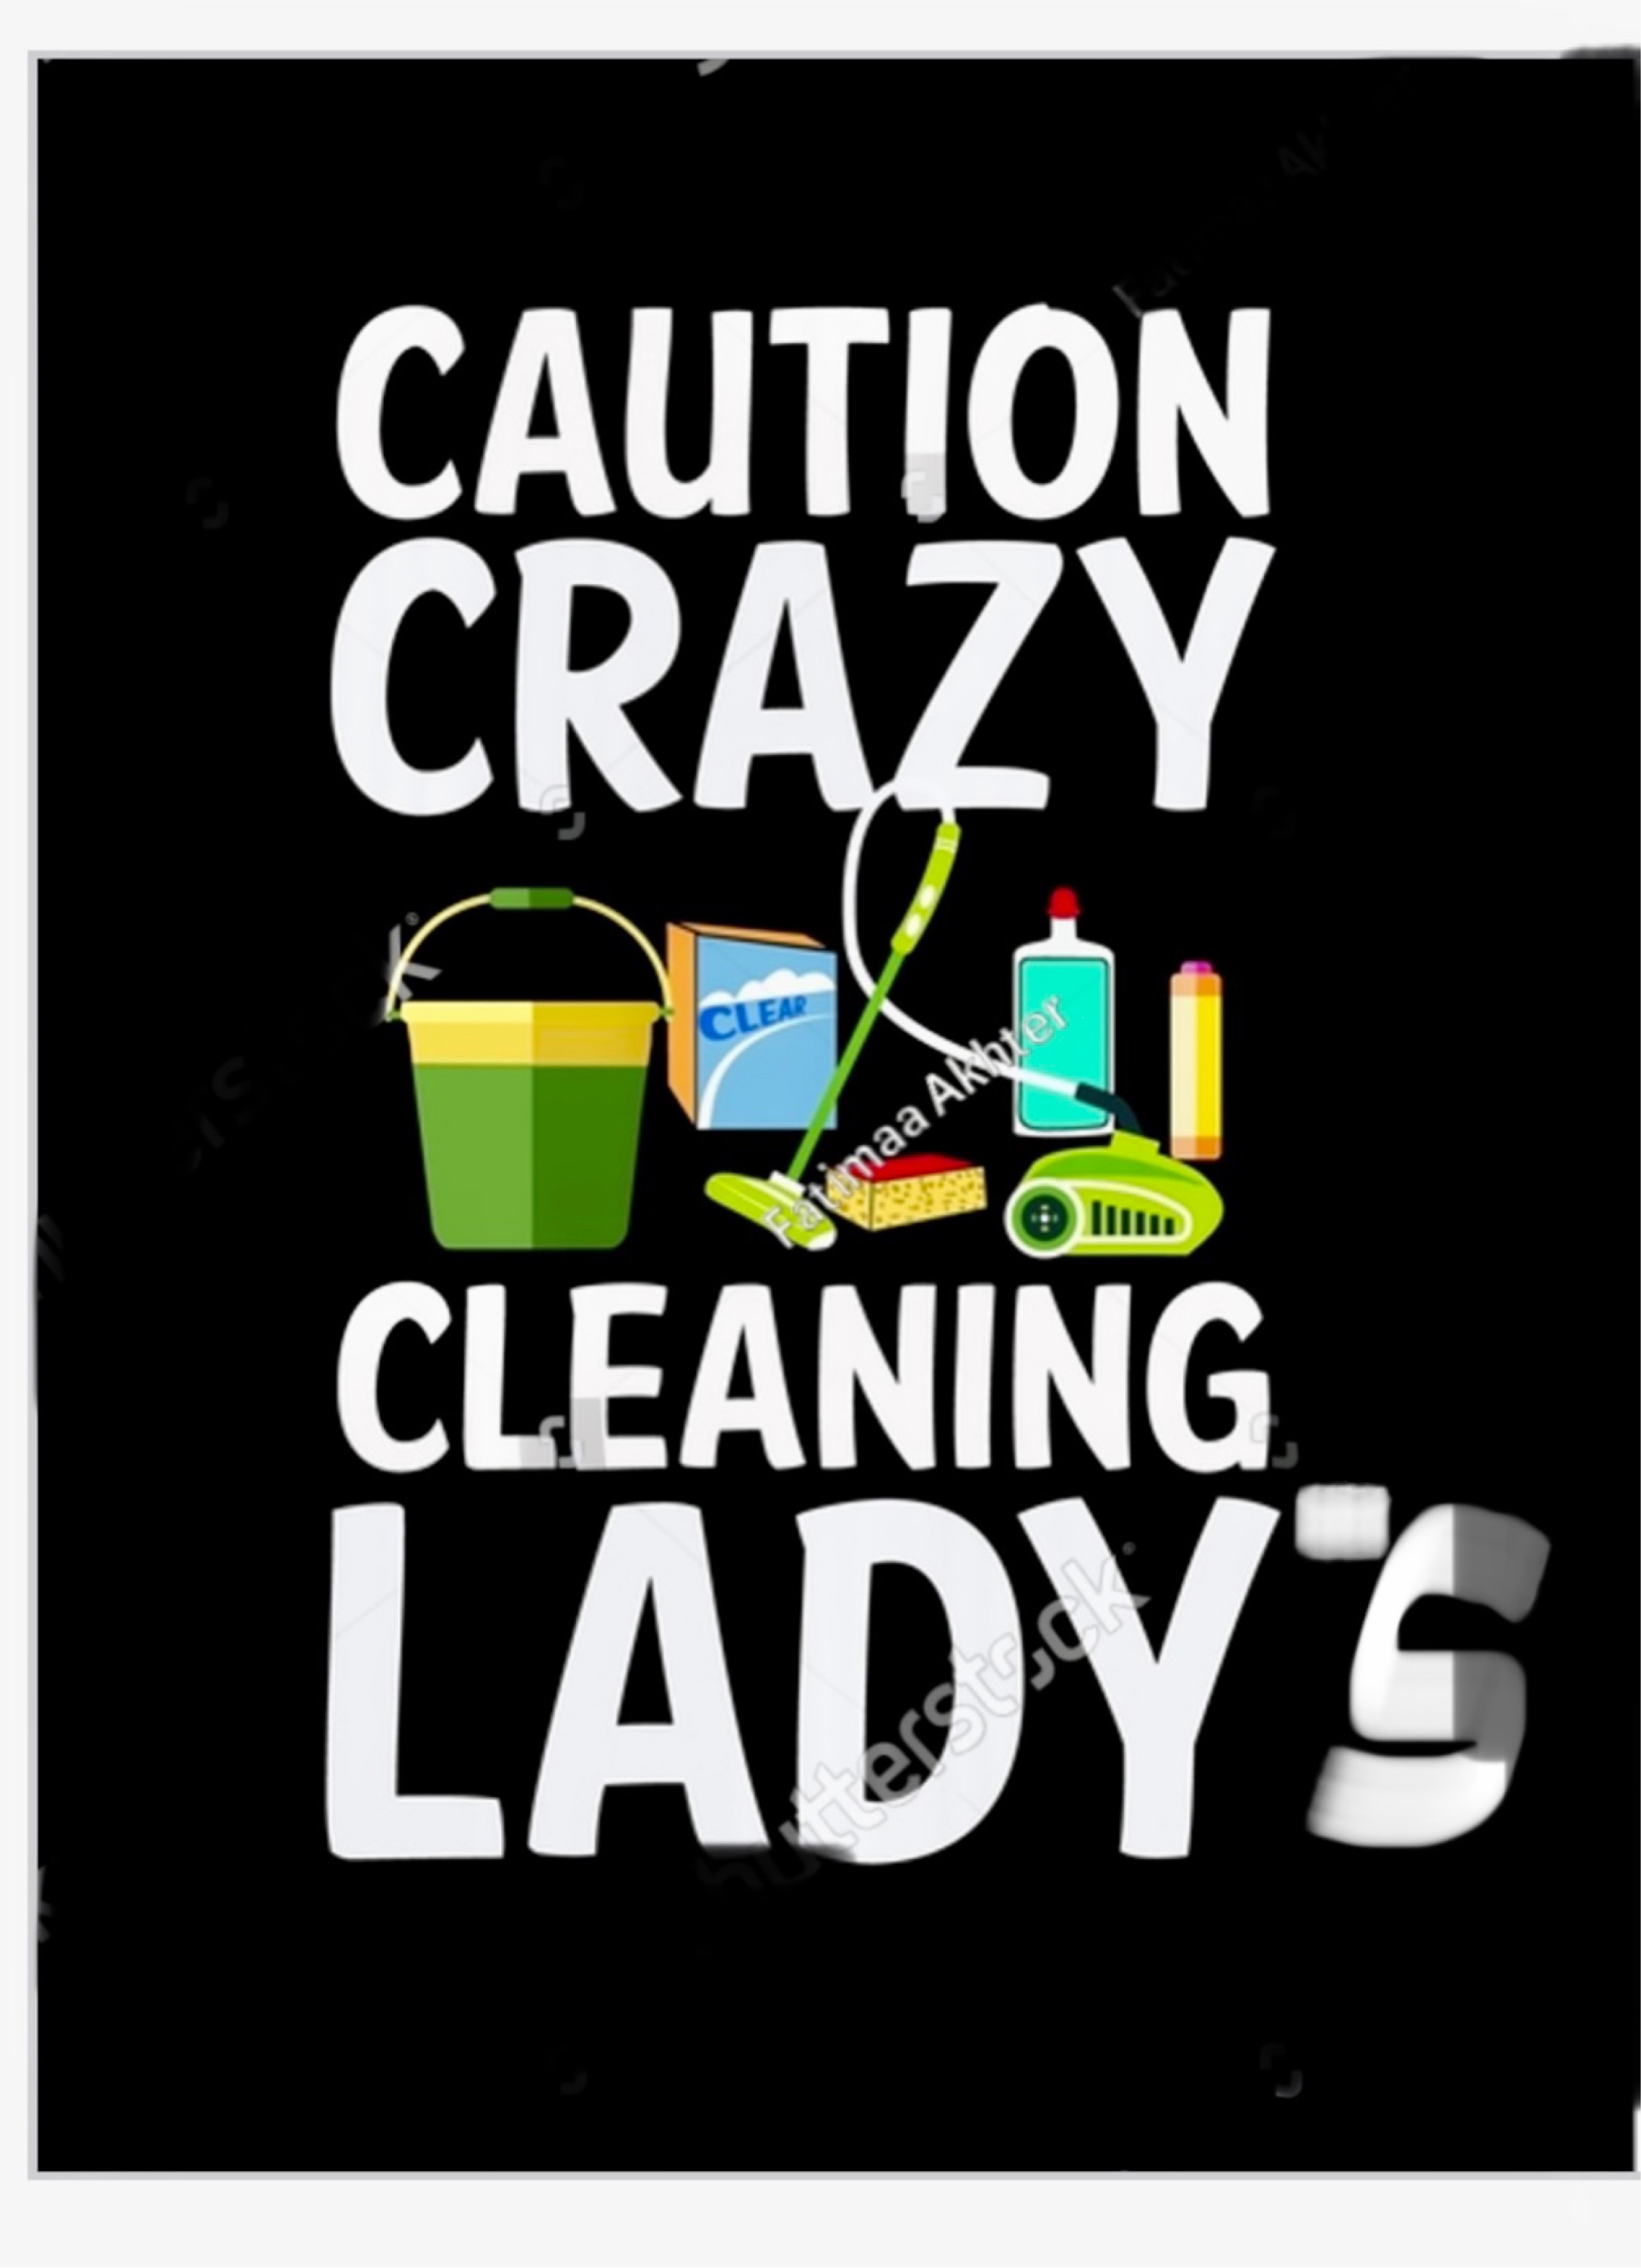 Cleaning Ladys Logo